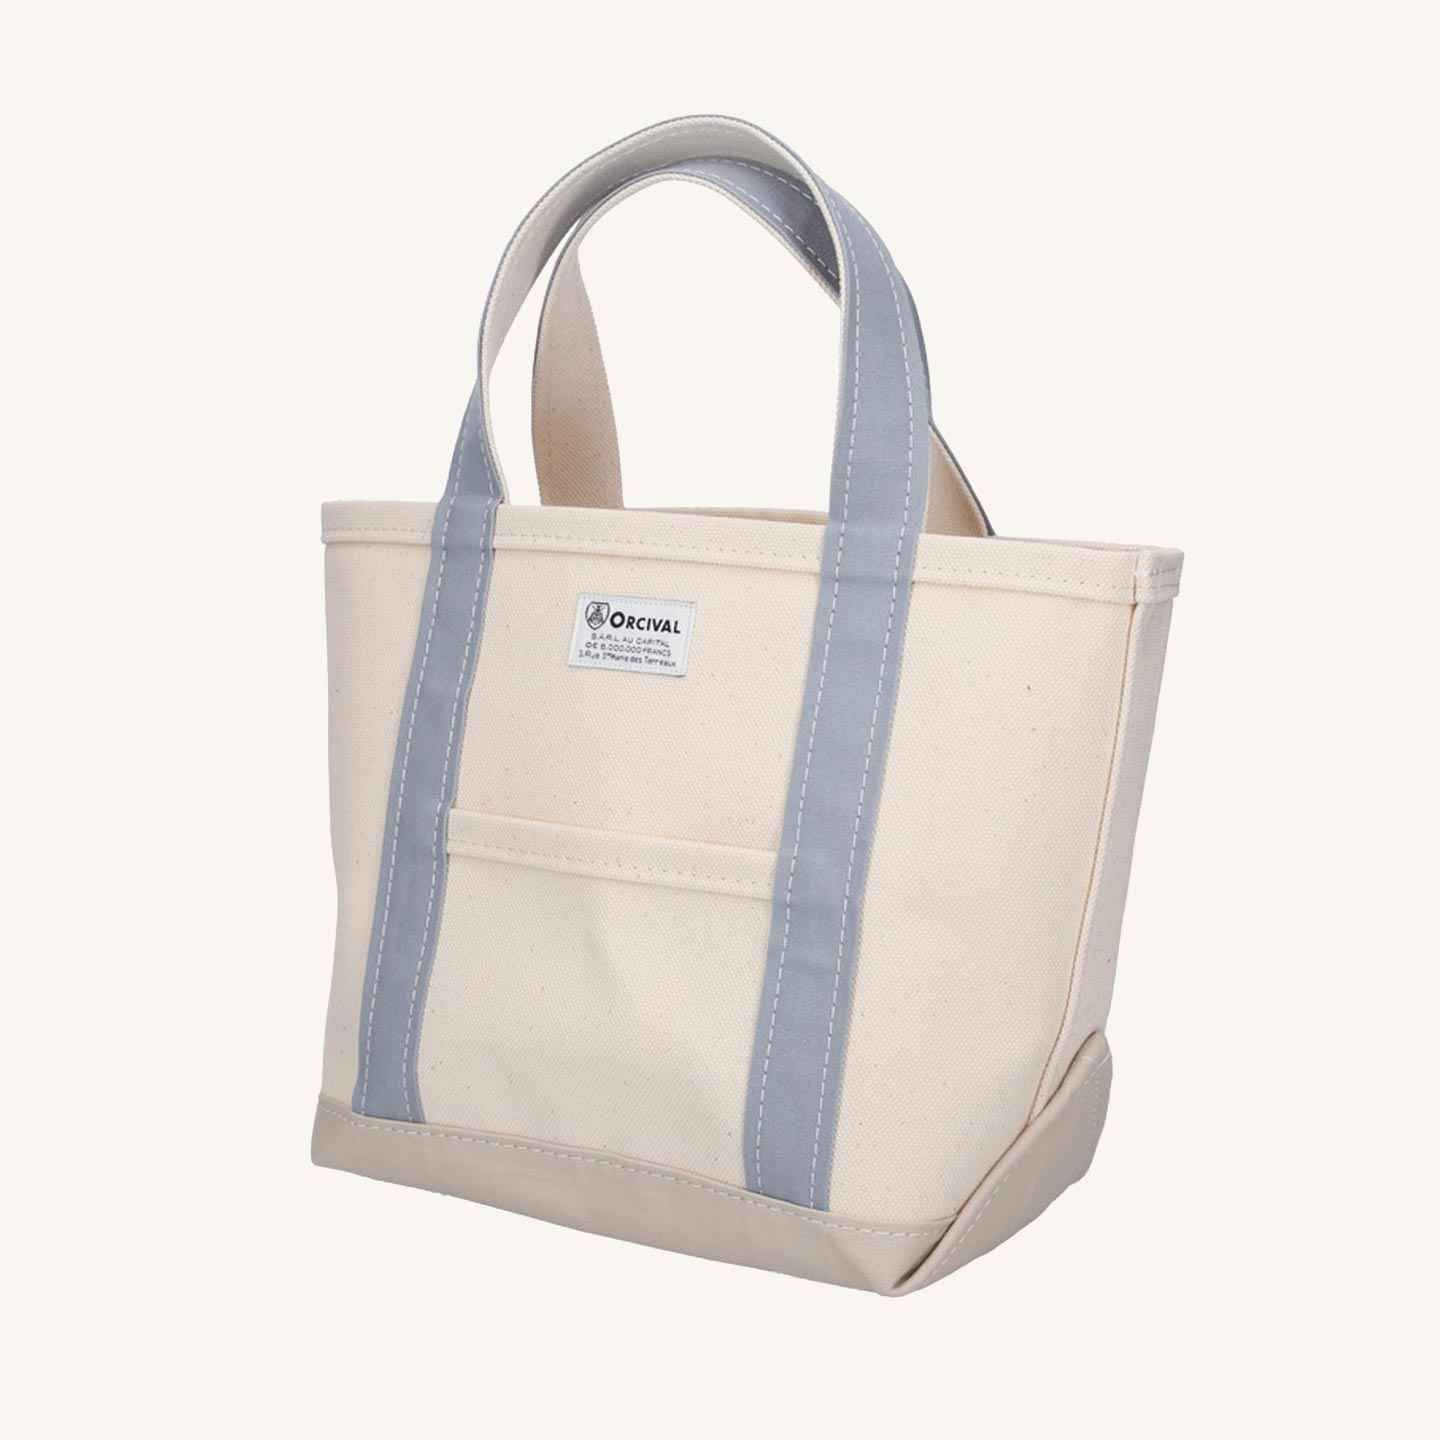 The Ecru / Blue Grey / Sand Beige tote bag, in a medium size, by Orcival